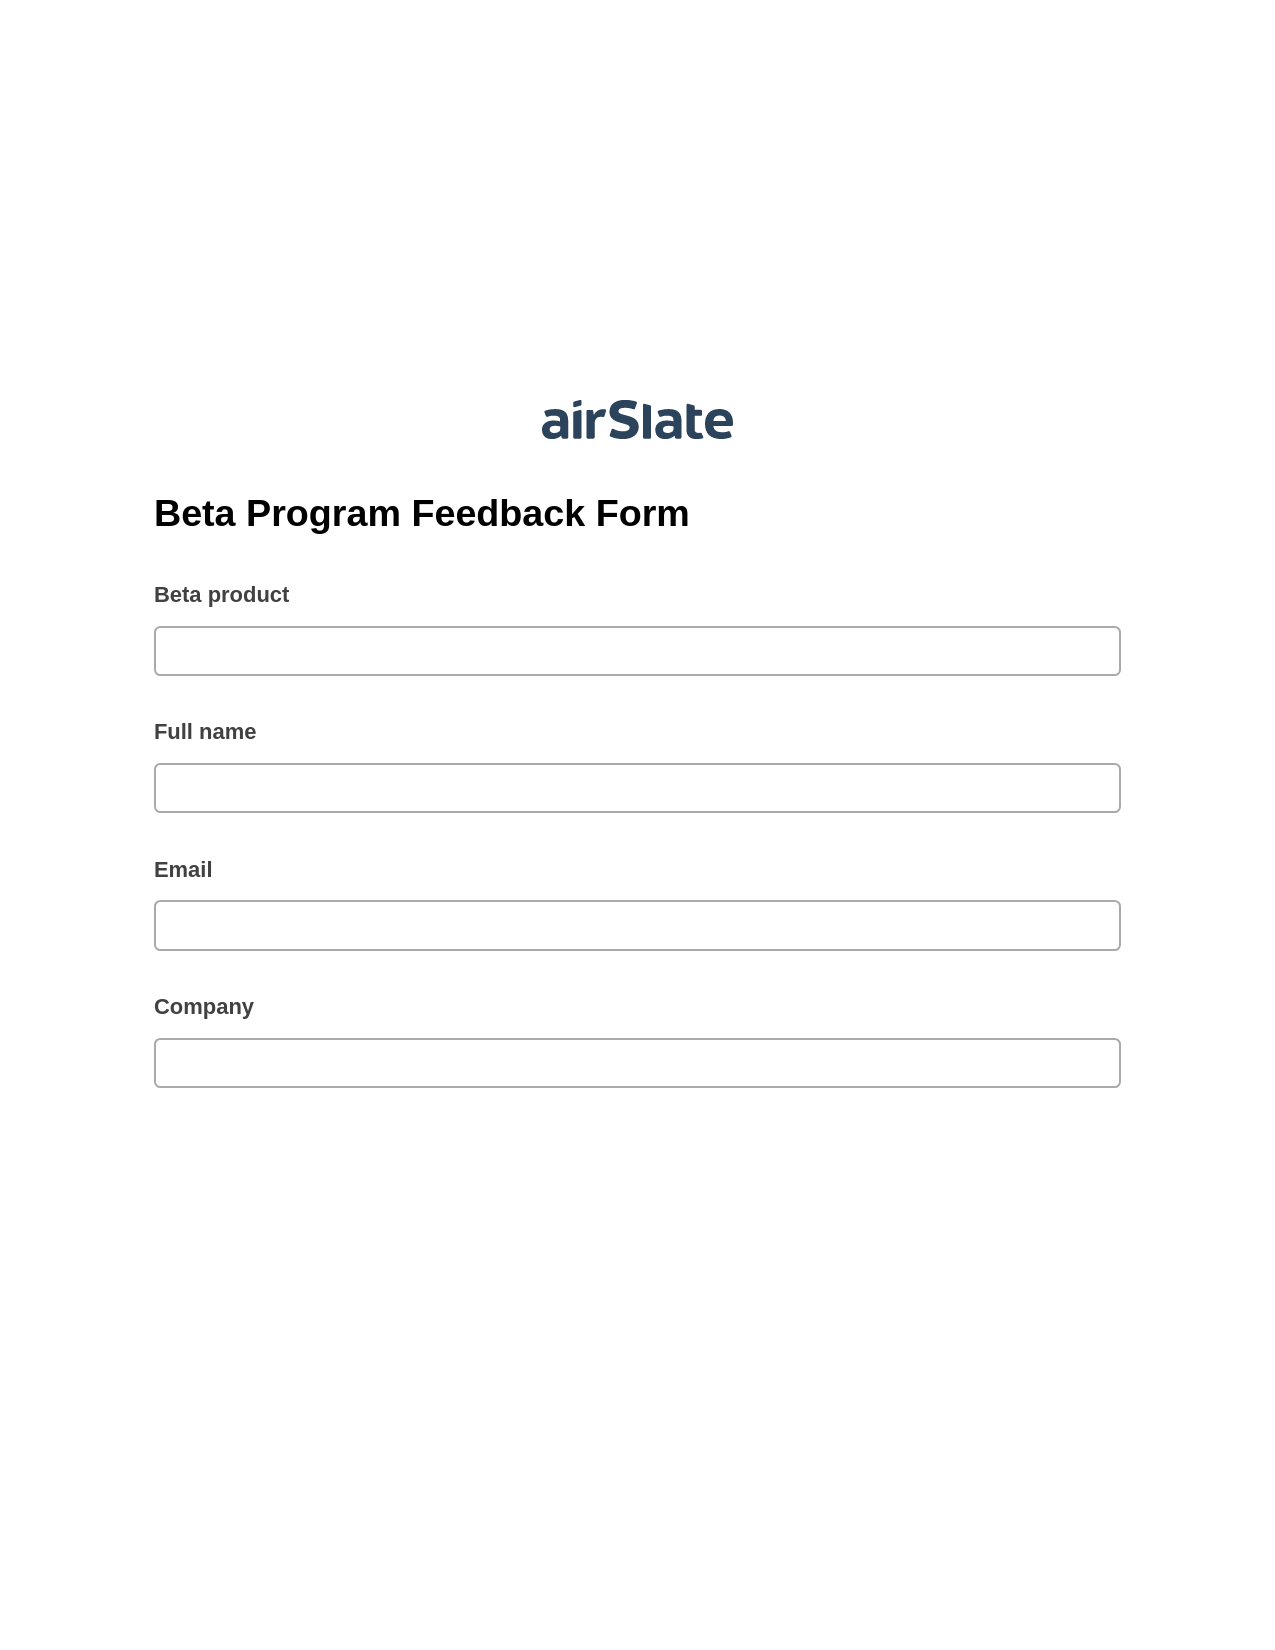 Multirole Beta Program Feedback Form Pre-fill Dropdowns from CSV File Bot, Webhook Bot, Export to NetSuite Record Bot